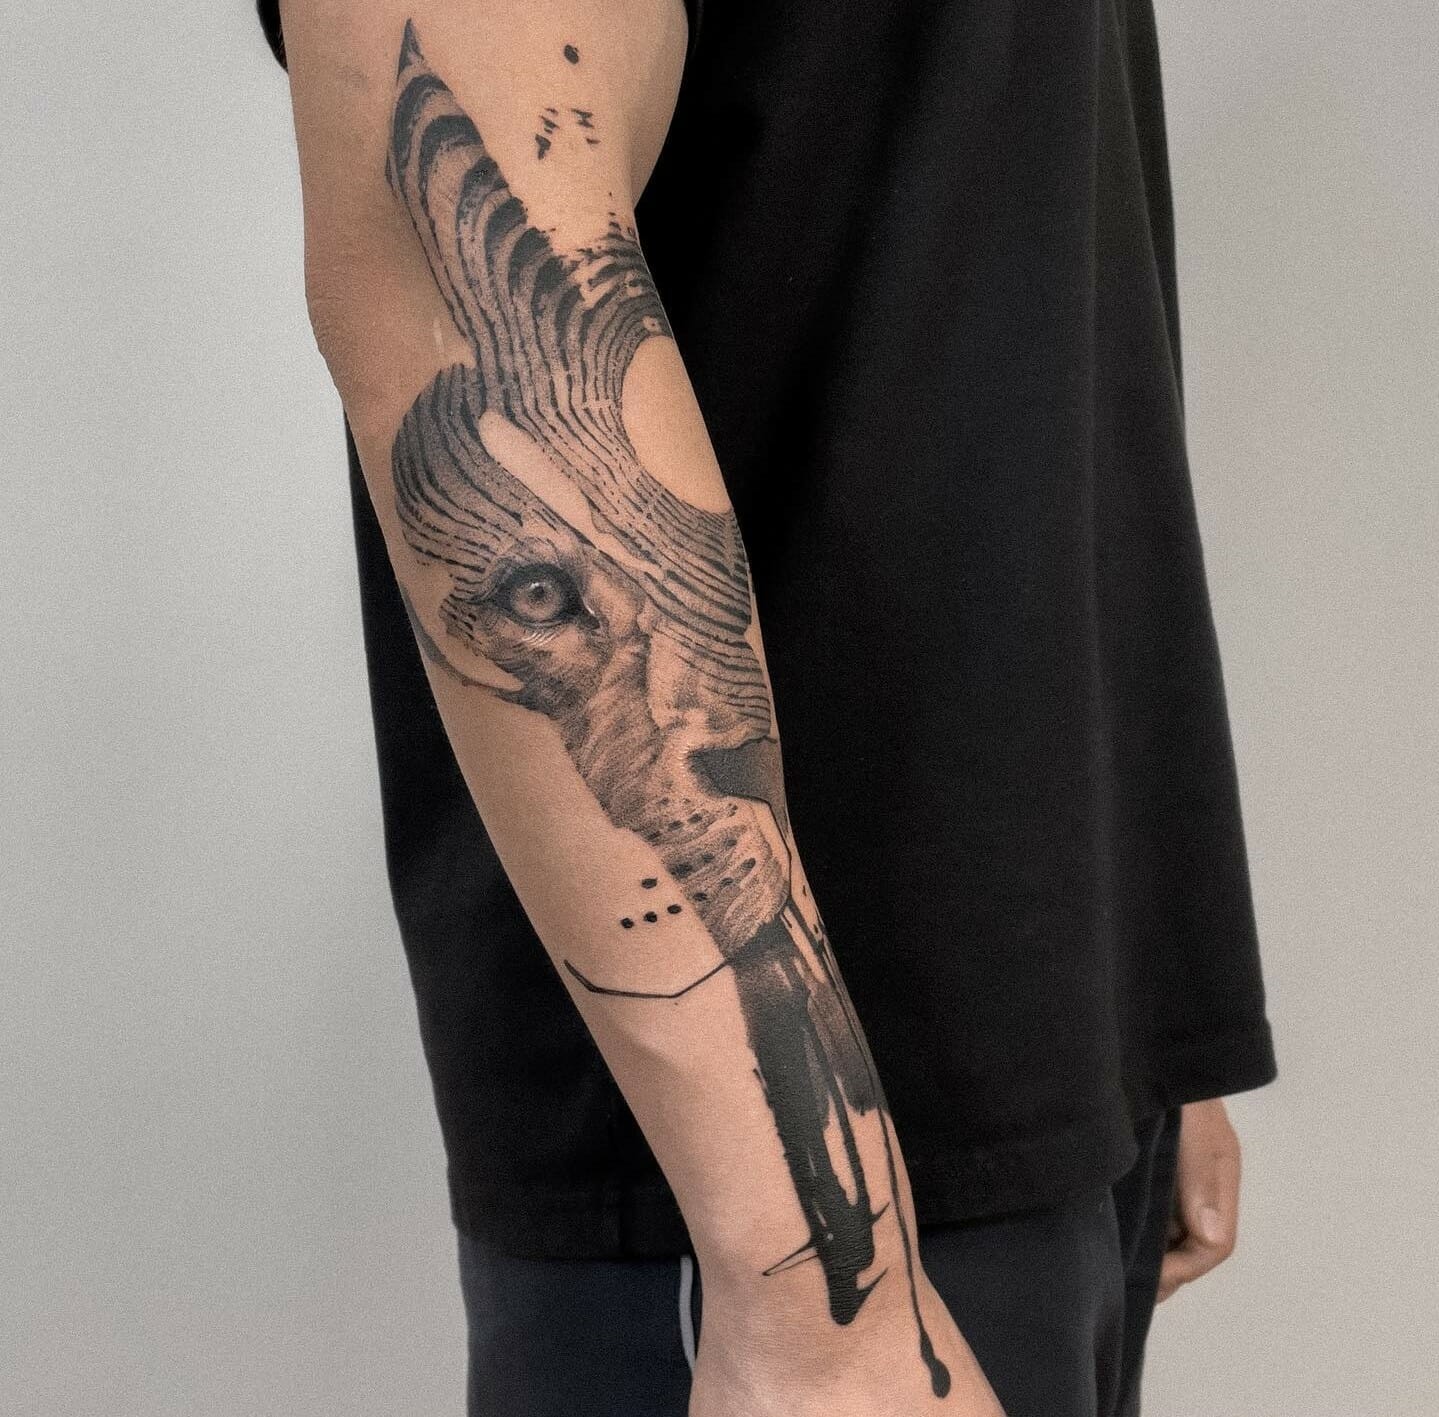 101 Best Half Sleeve Tattoo For Men Ideas That Will Blow Your Mind! - Outsons